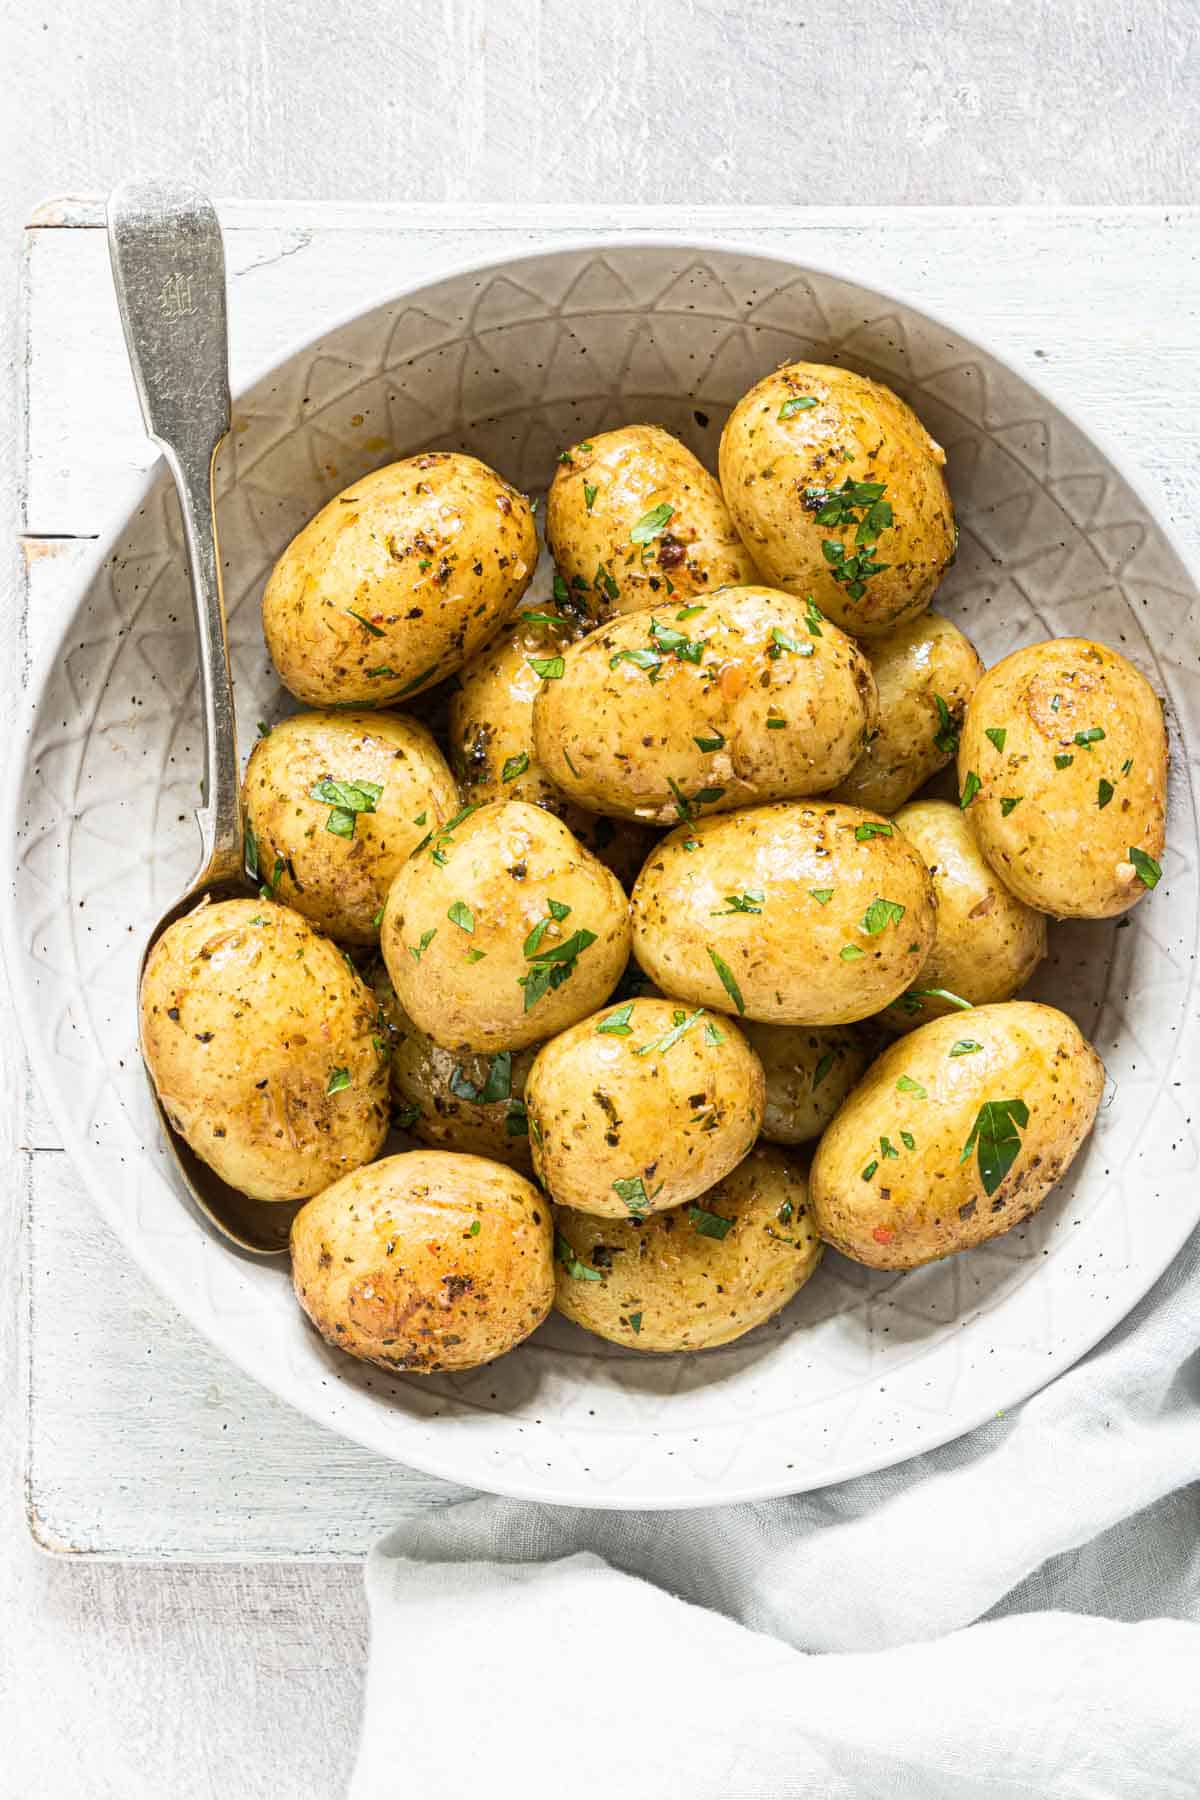 A plate full of cooked instant pot baby potatoes with herbs